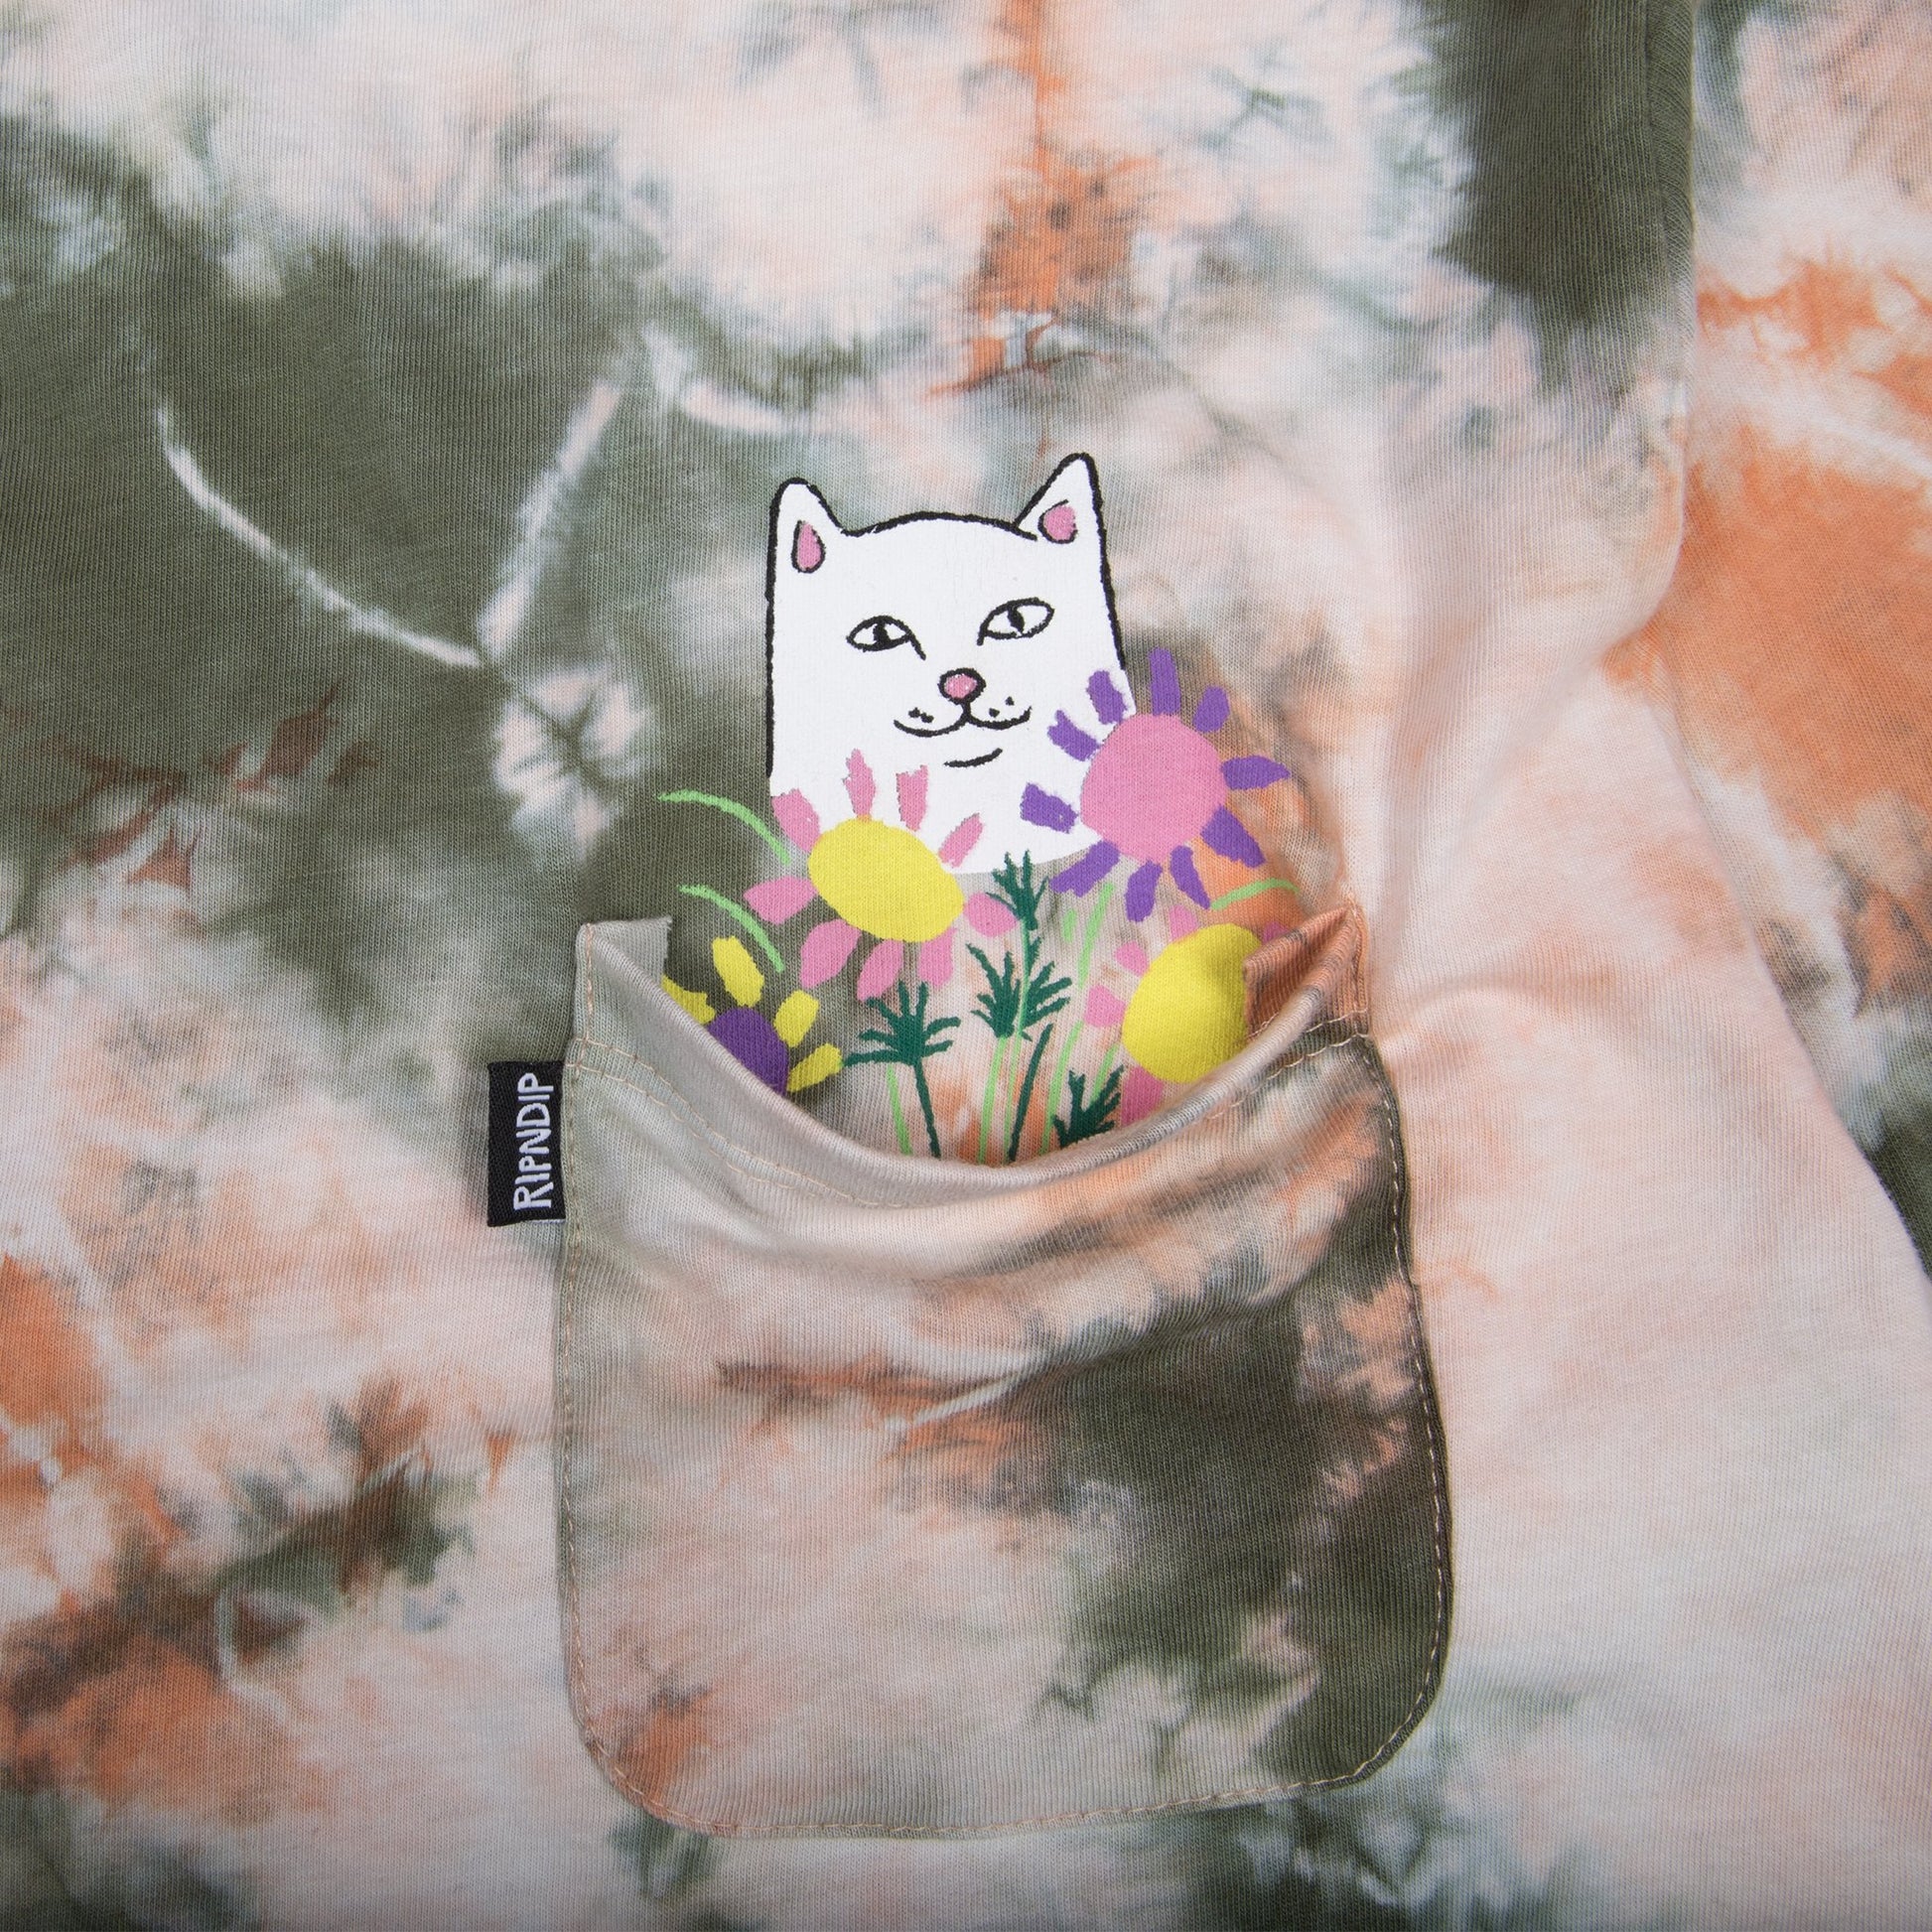 RIPNDIP - Flowers For Bae Men's L/S Tee, Green/Pink Acid Wash - The Giant Peach